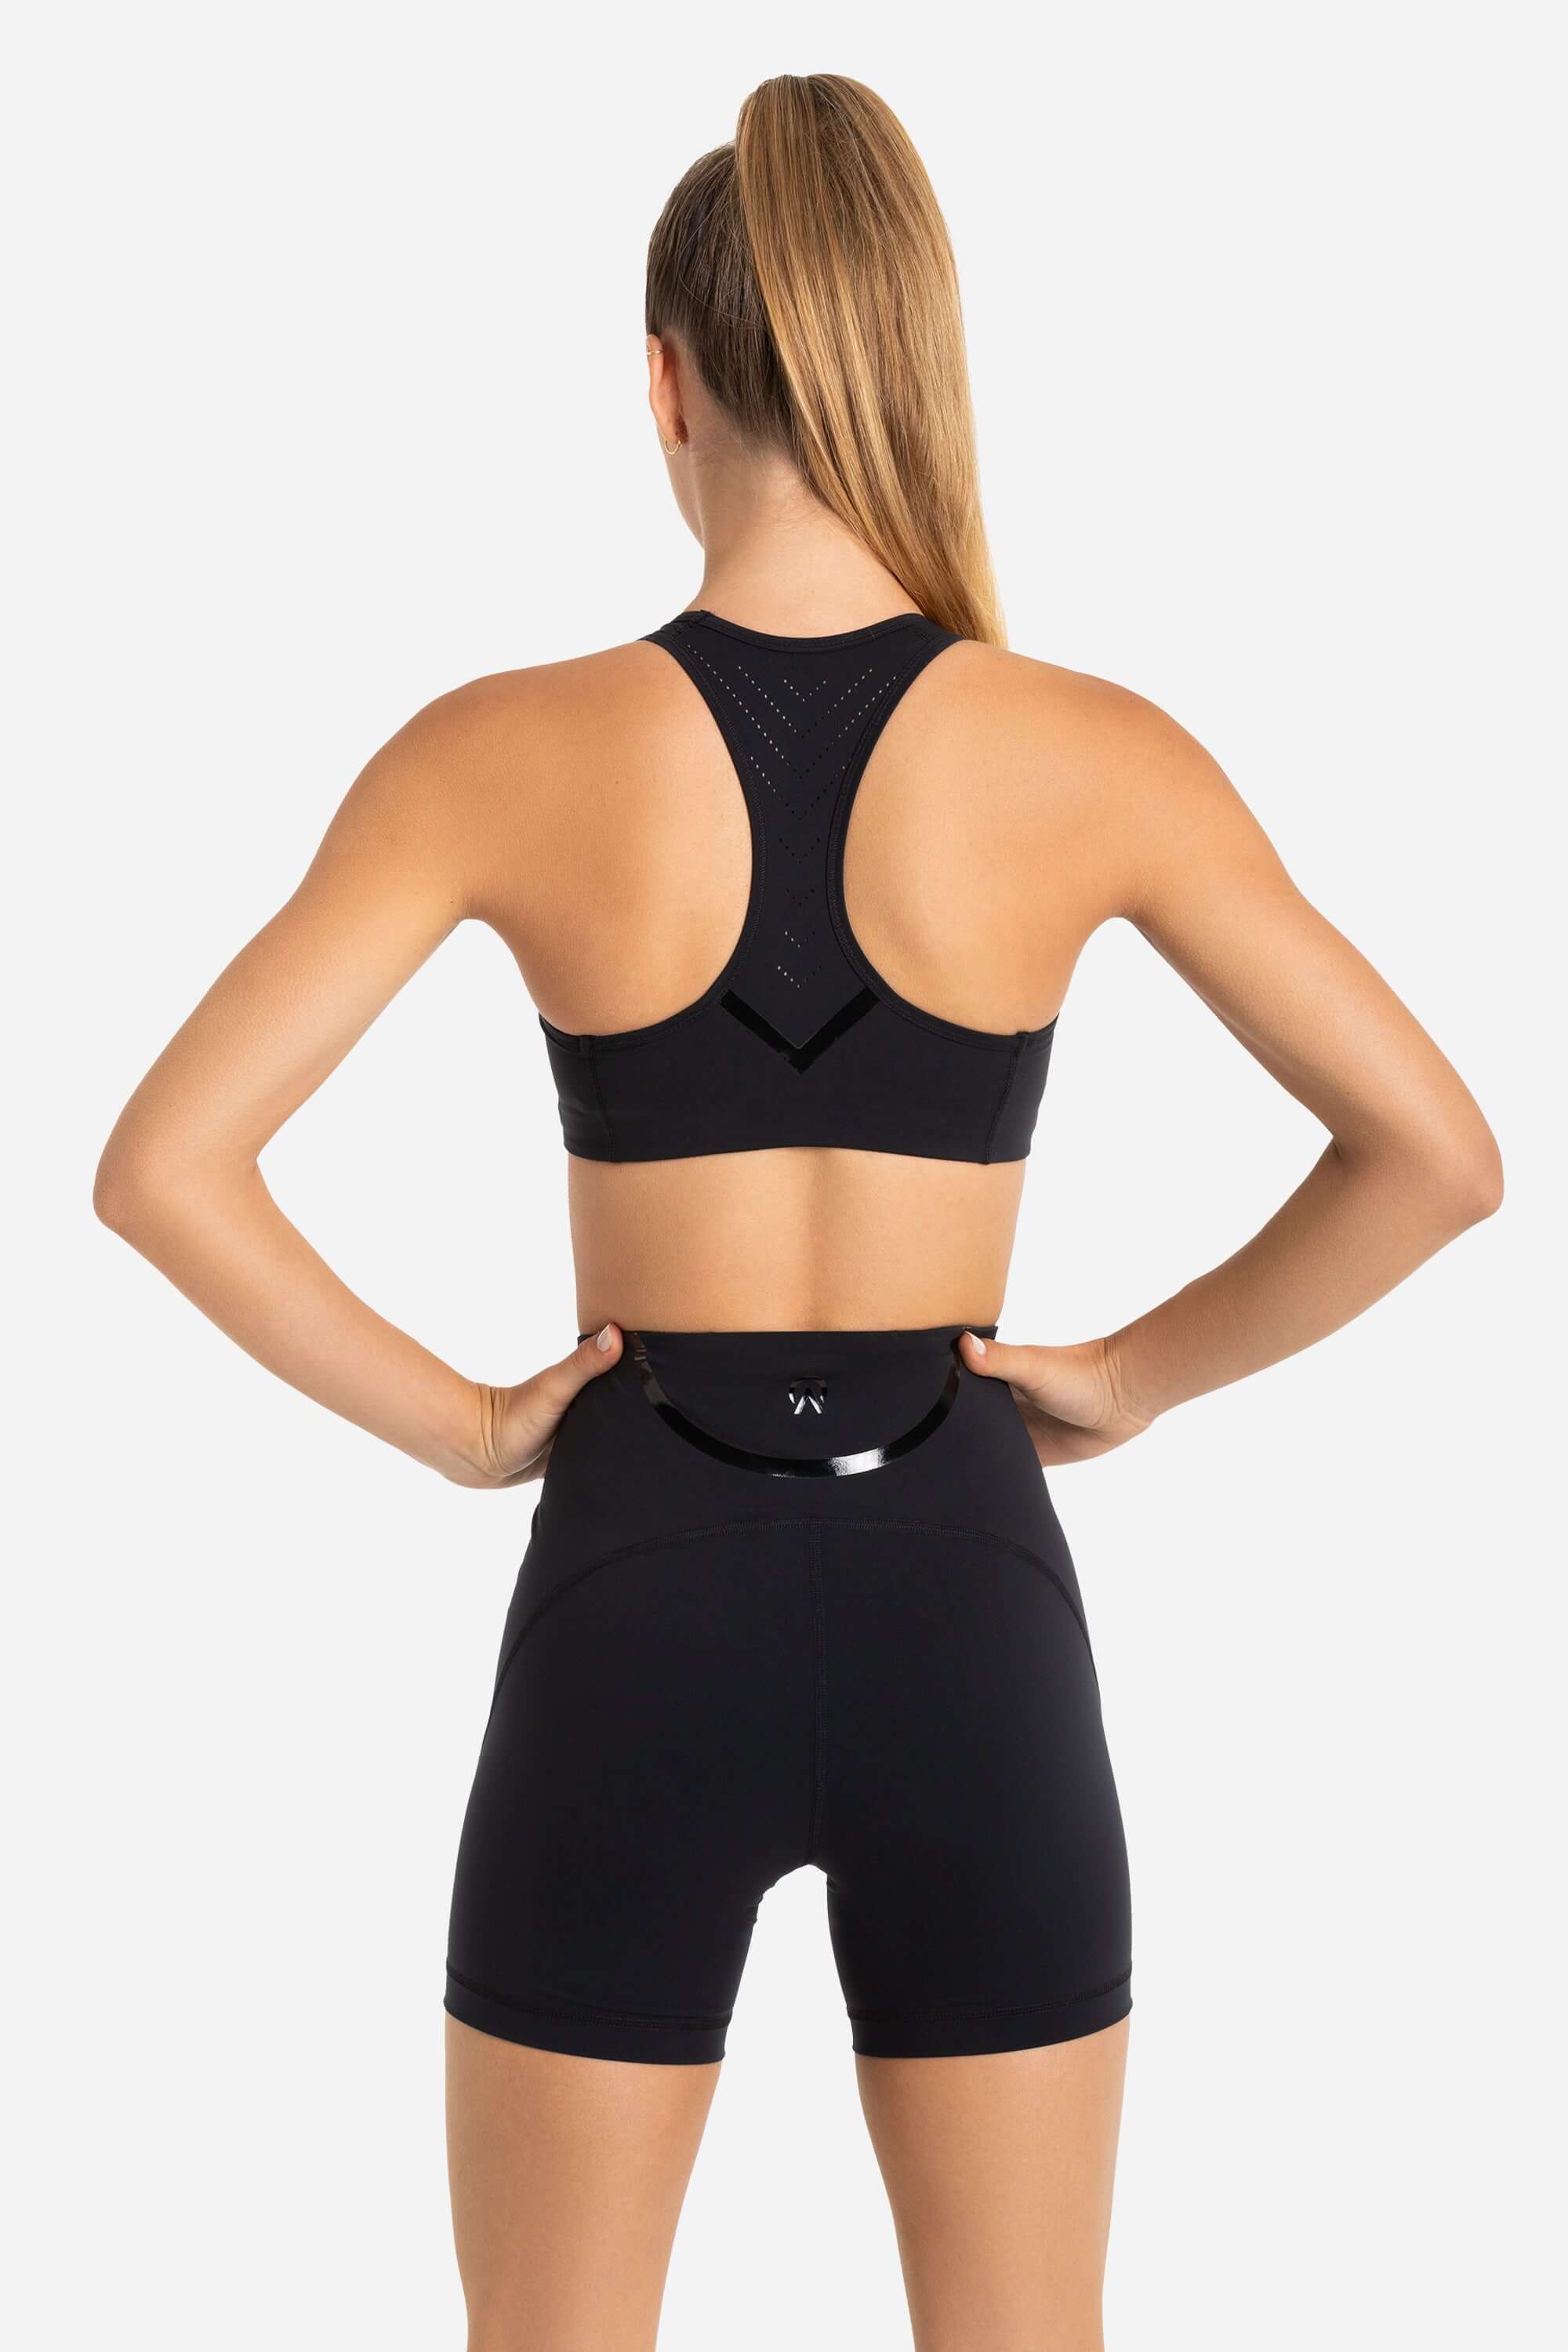 Women in a black sports bra and black short tights from AYCANE